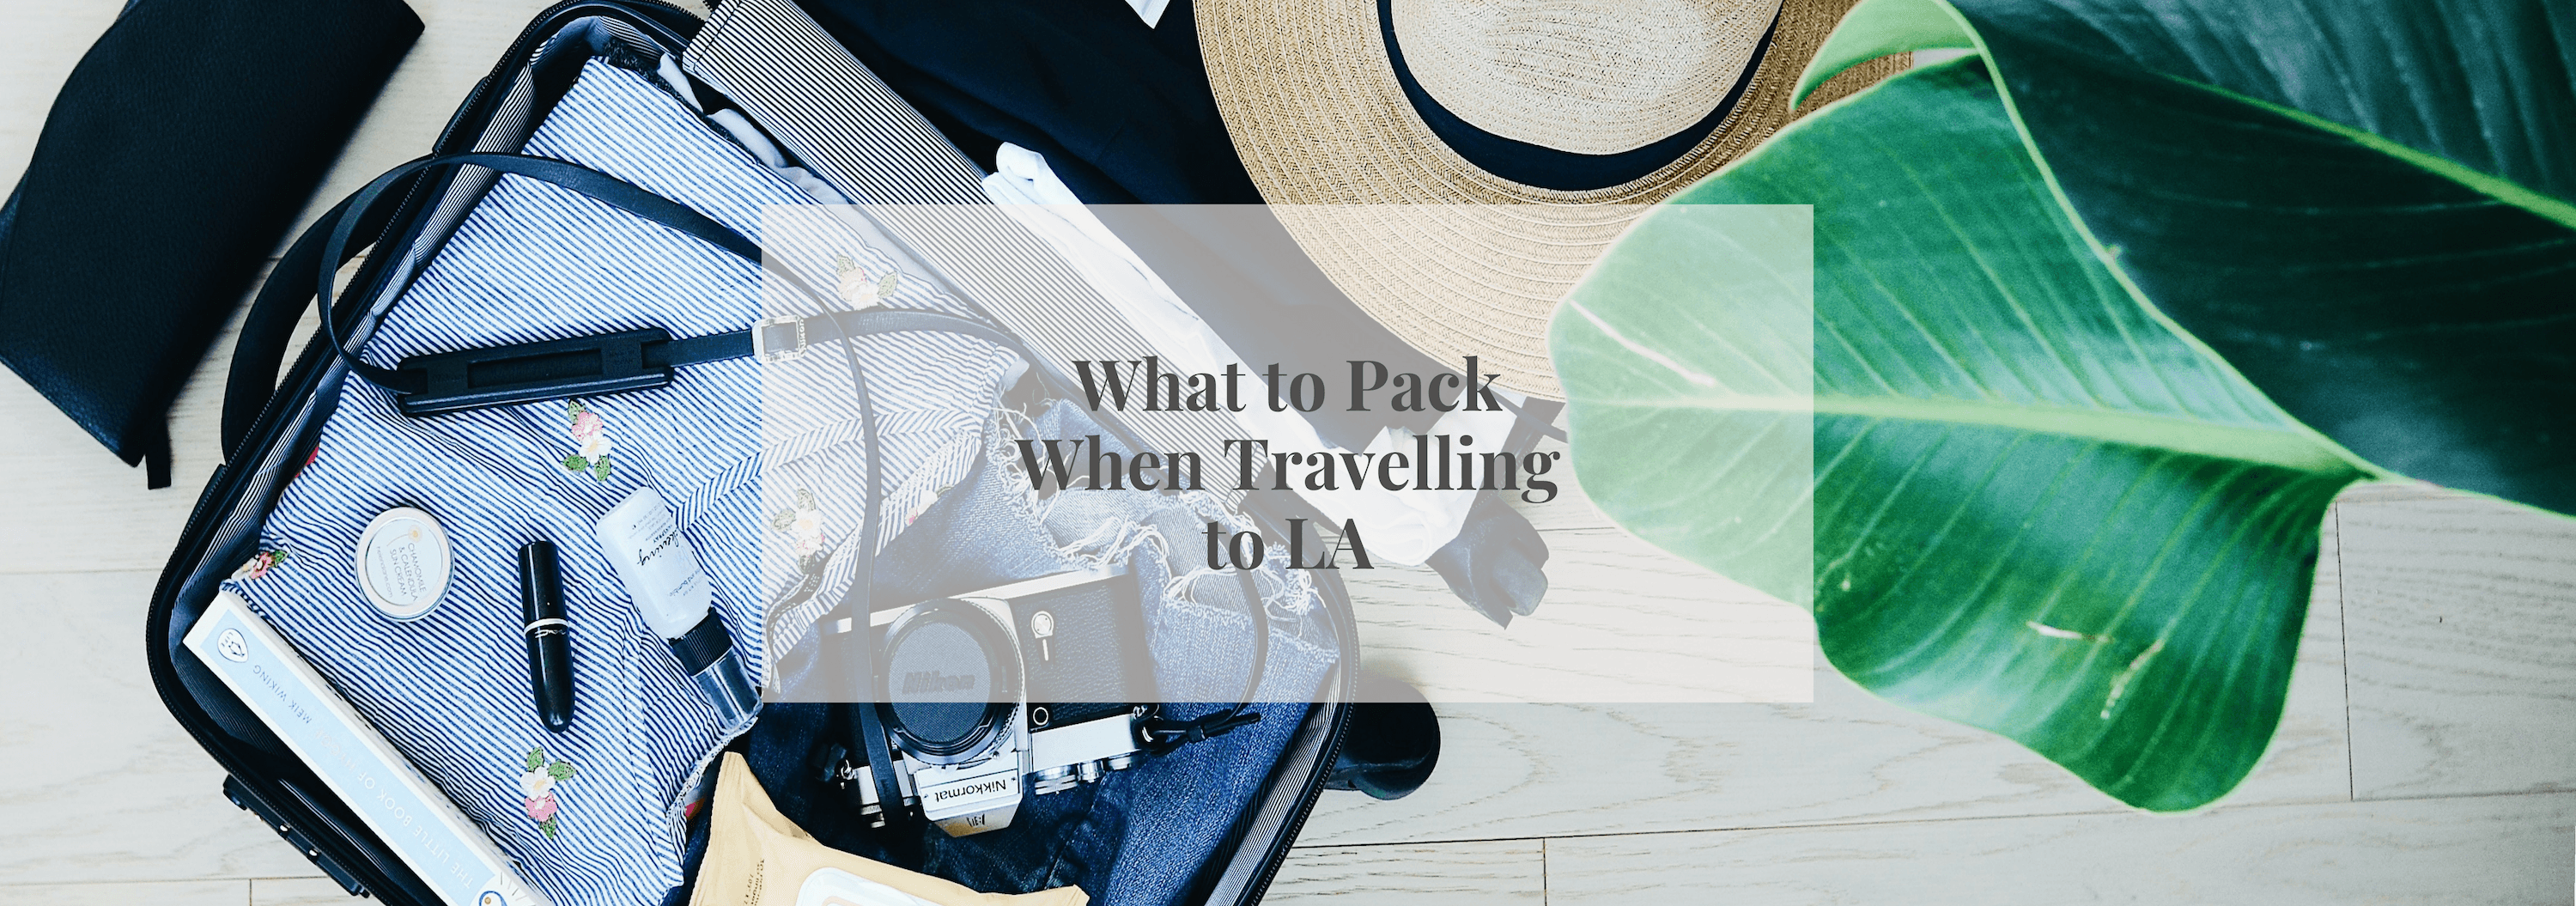 What to Pack When Travelling to LA - Numi